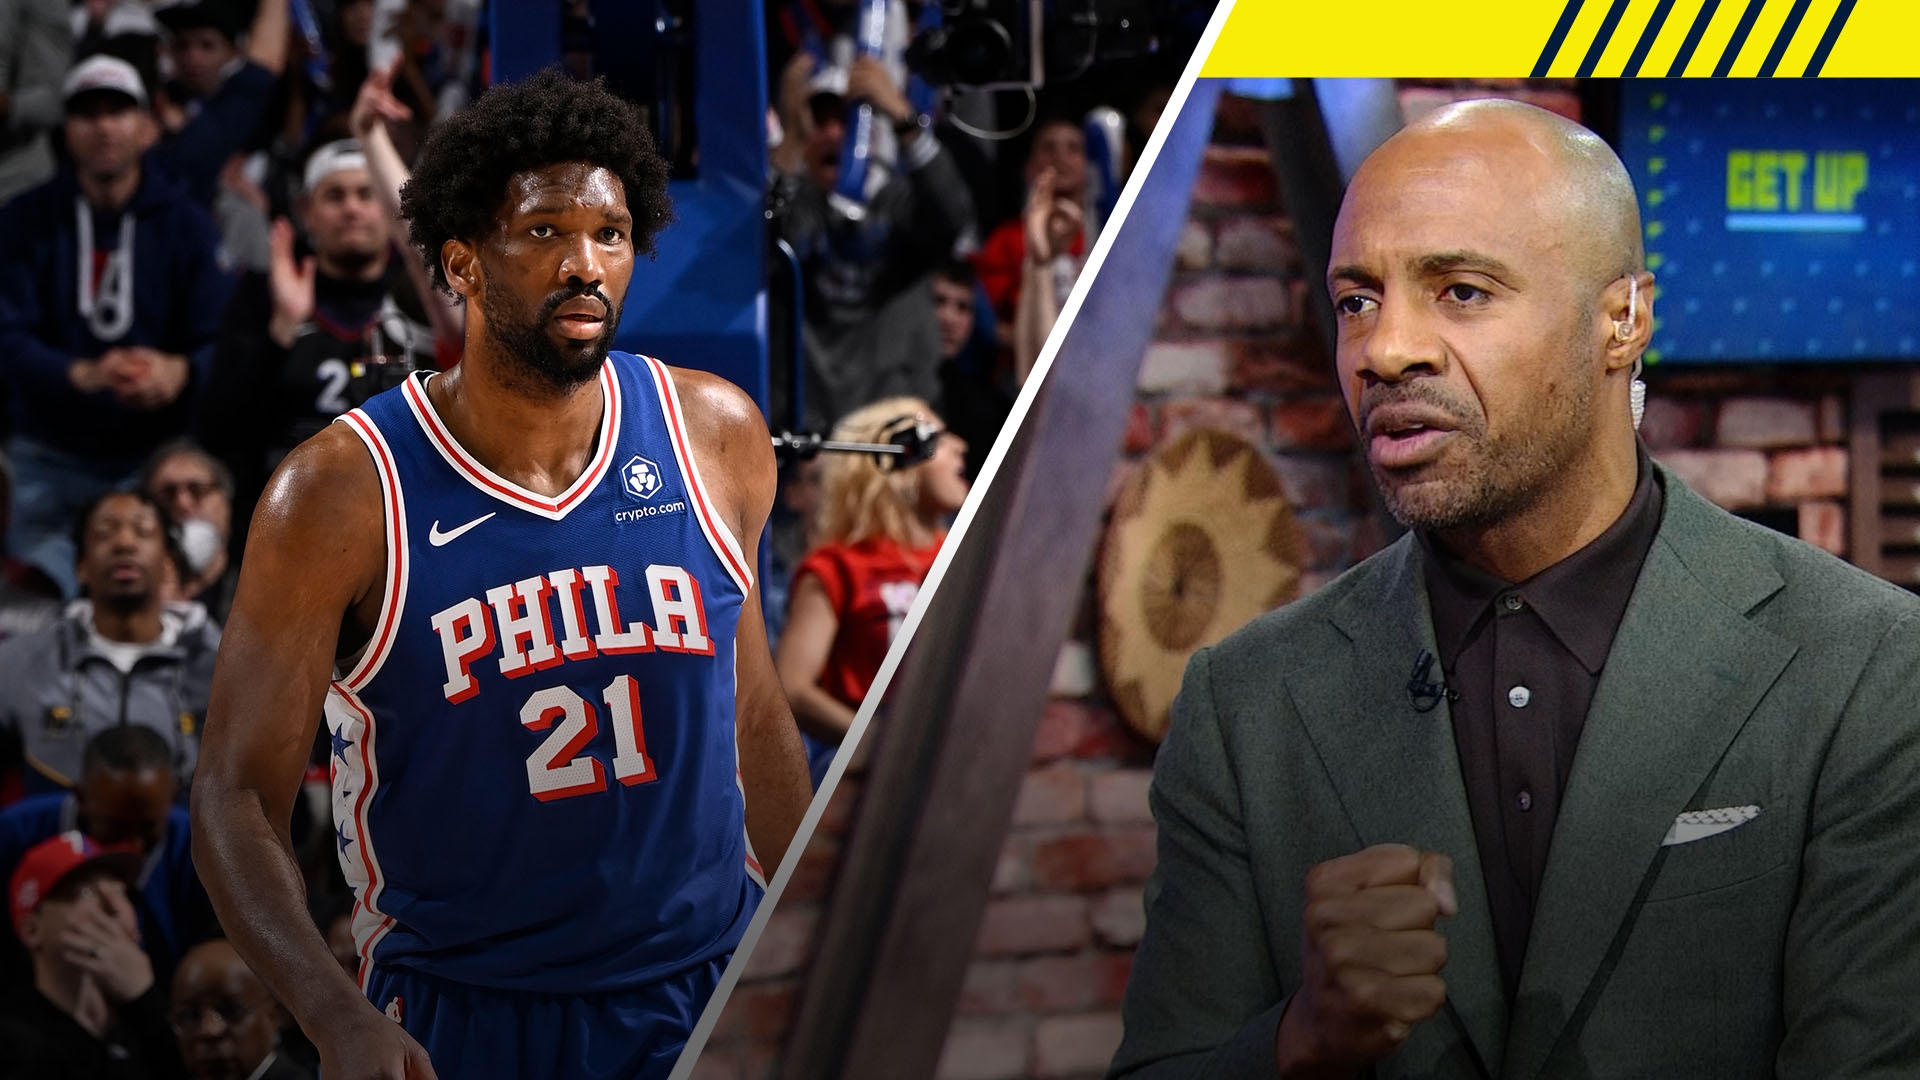 Jay Williams: Embiid should've been ejected for foul on Robinson